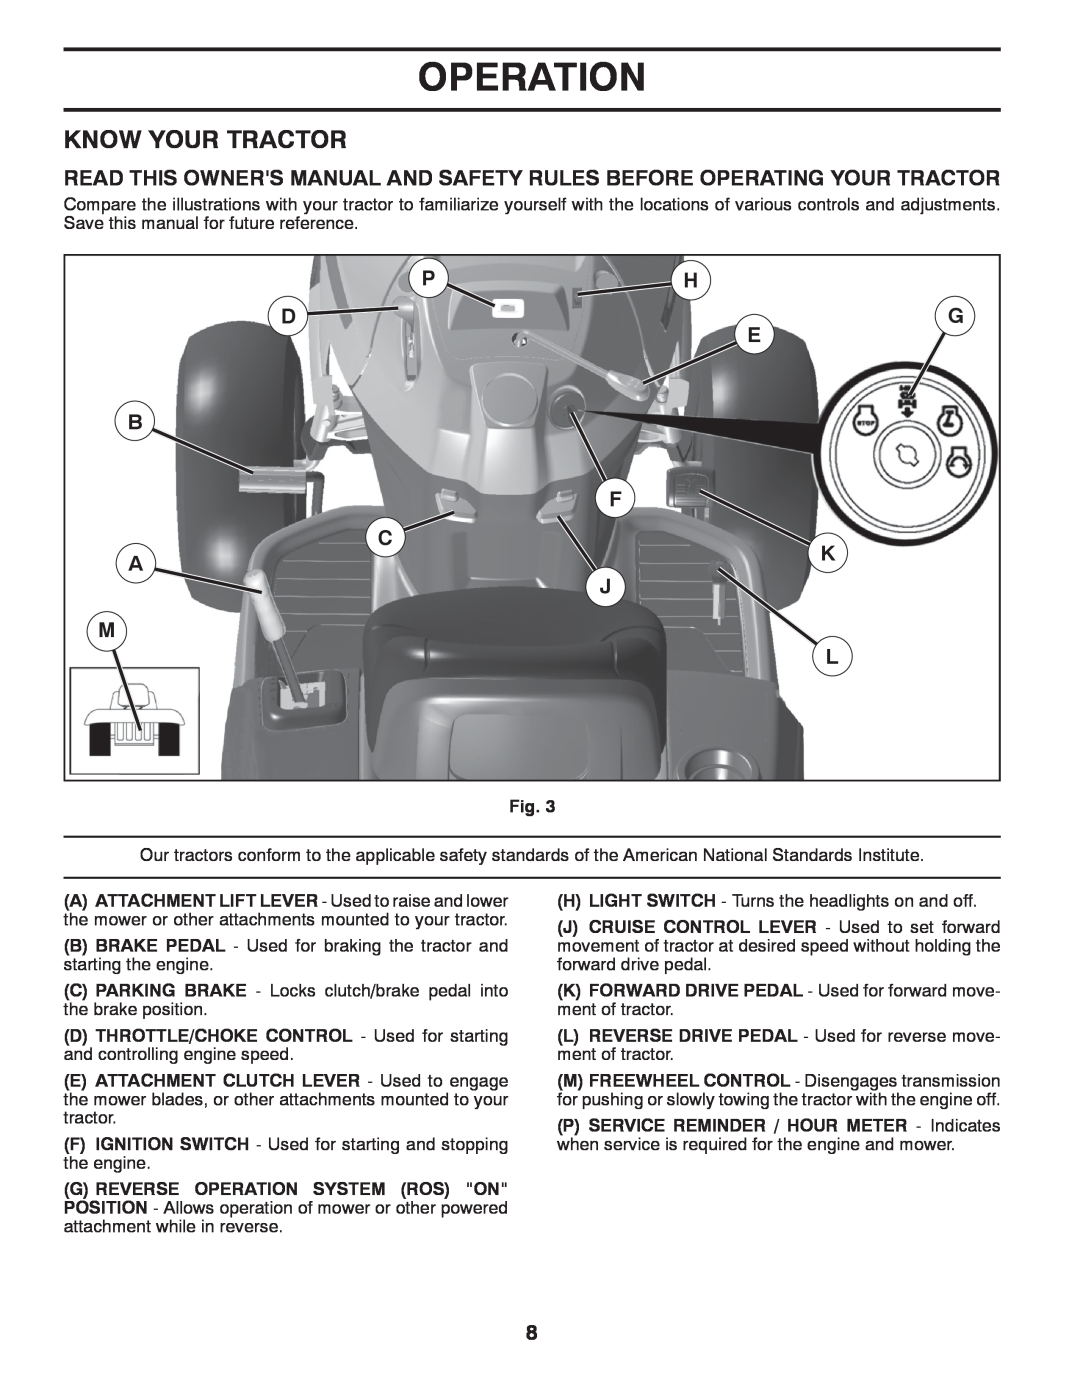 Husqvarna 96045001800, 532 42 57-62 owner manual Know Your Tractor, Ph Dg E, Operation 